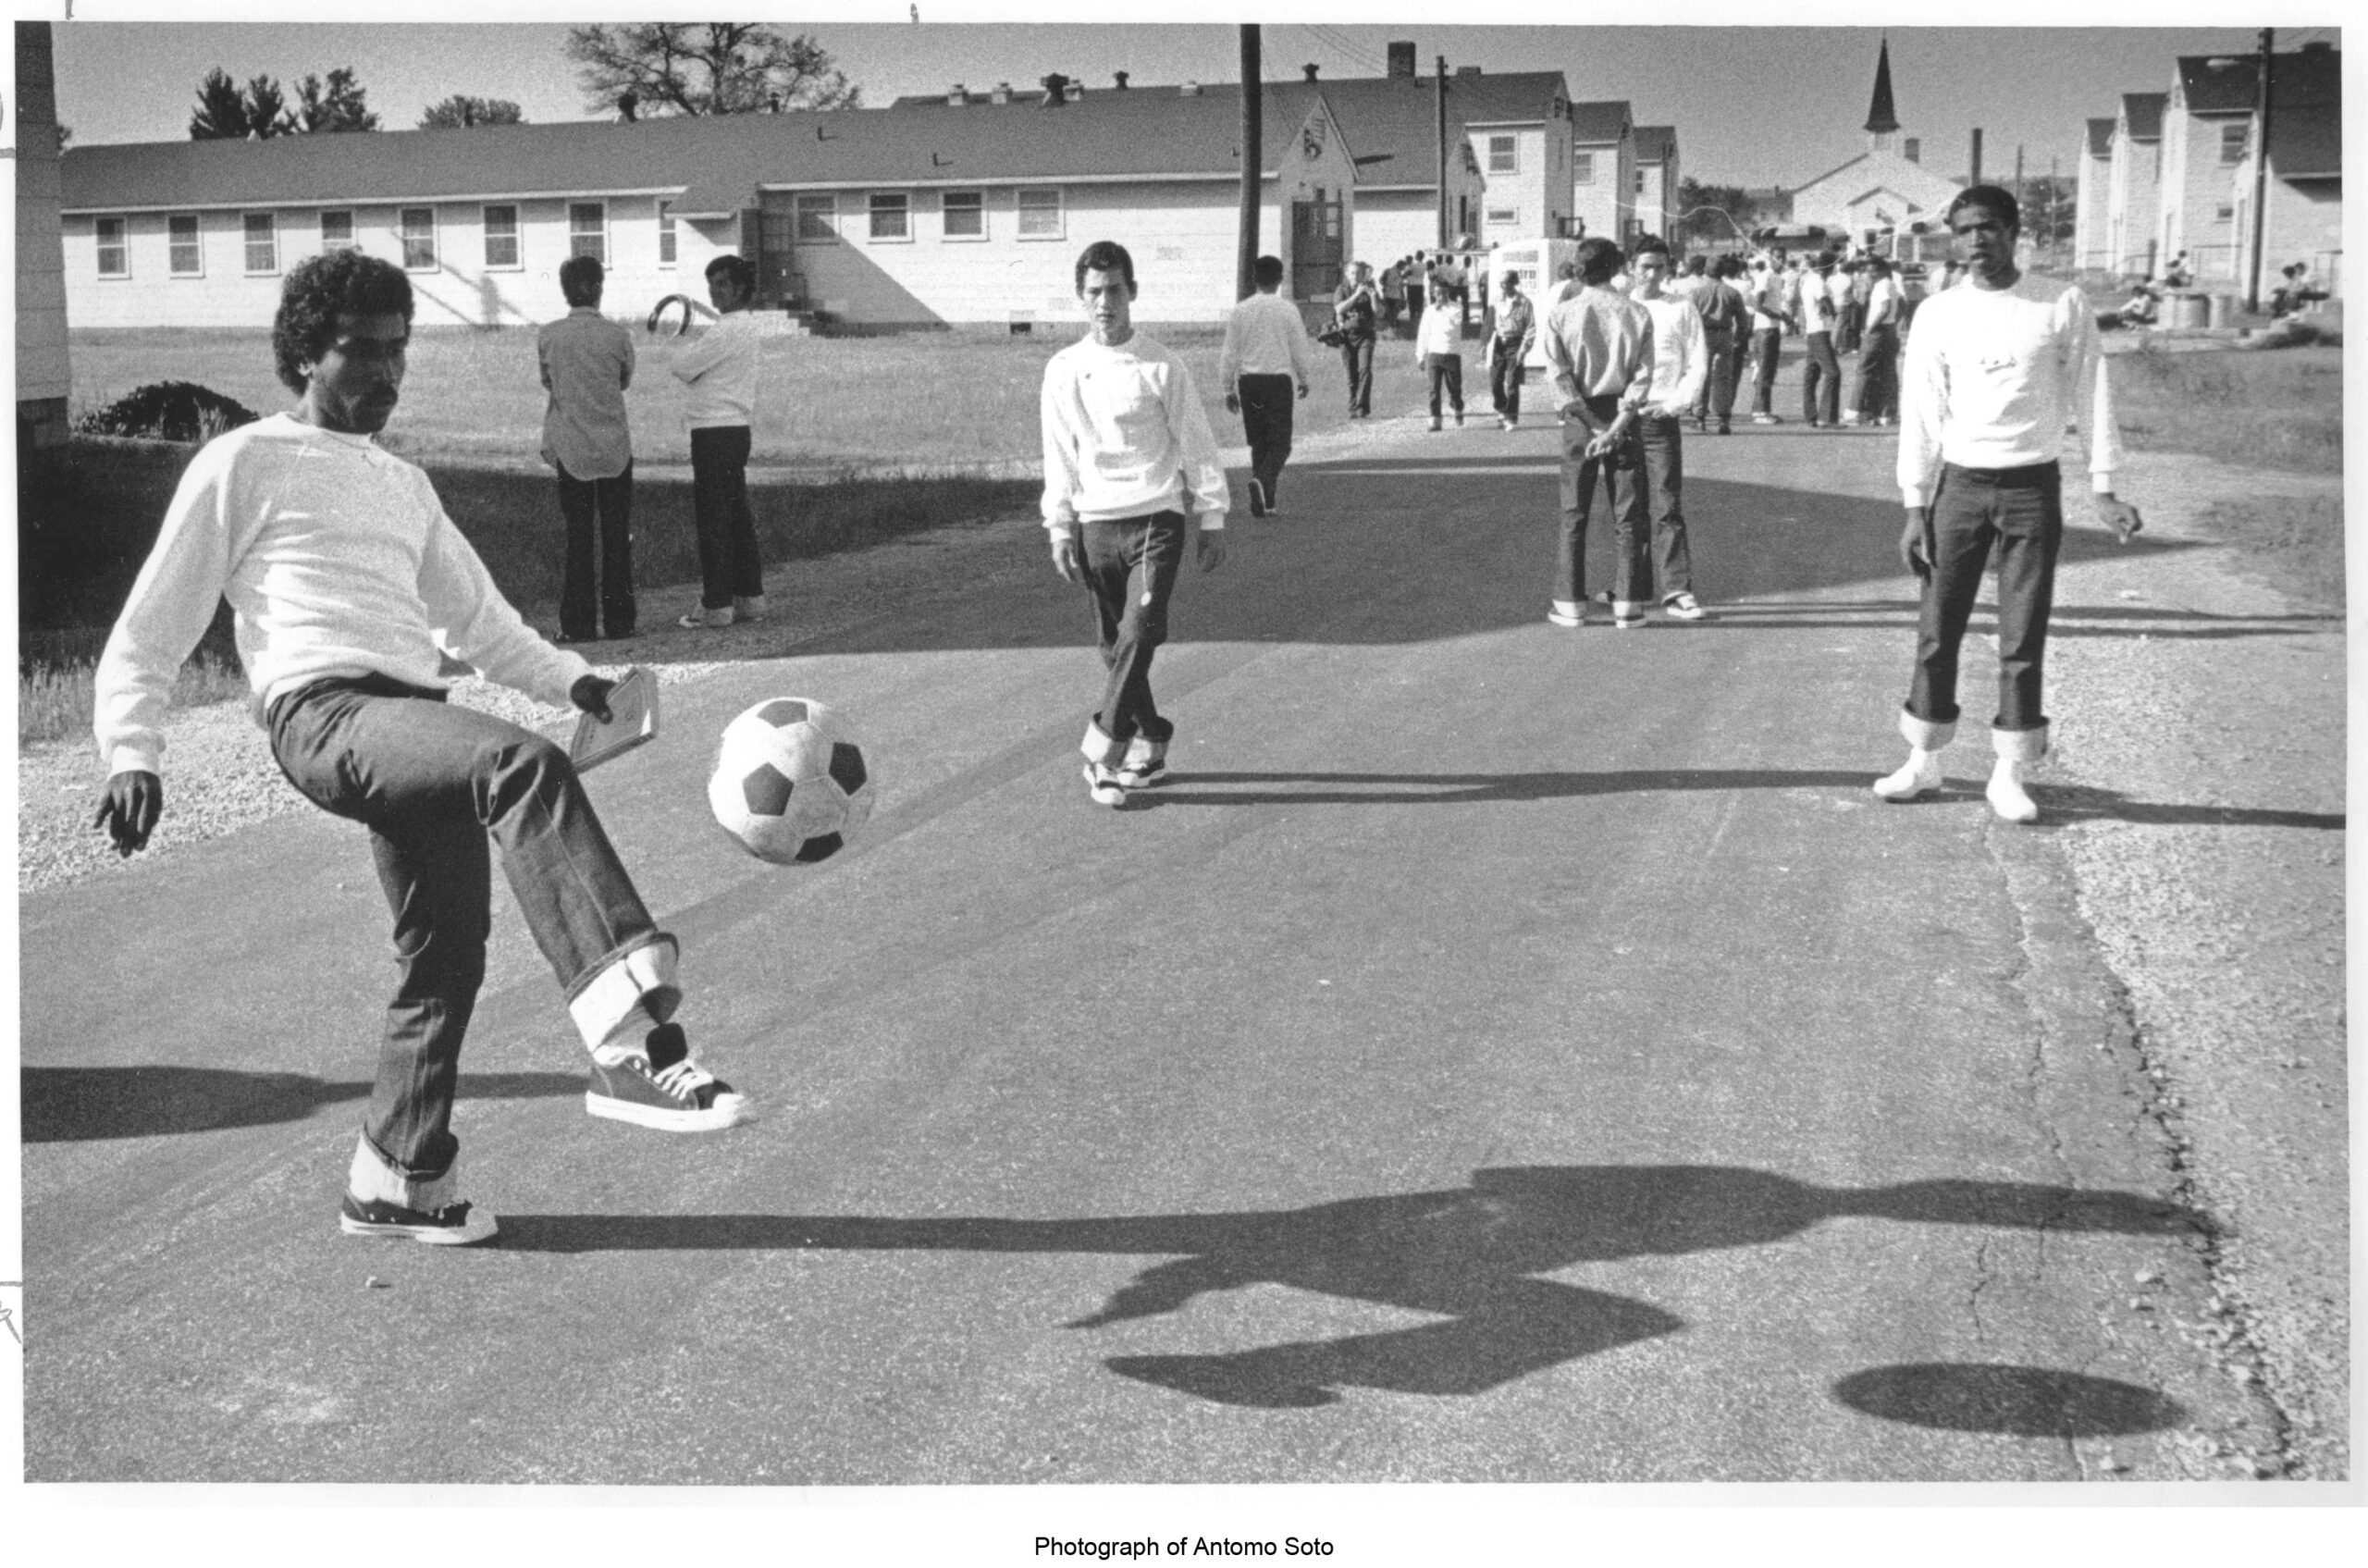 A black and white photograph of Cuban refugees playing soccer